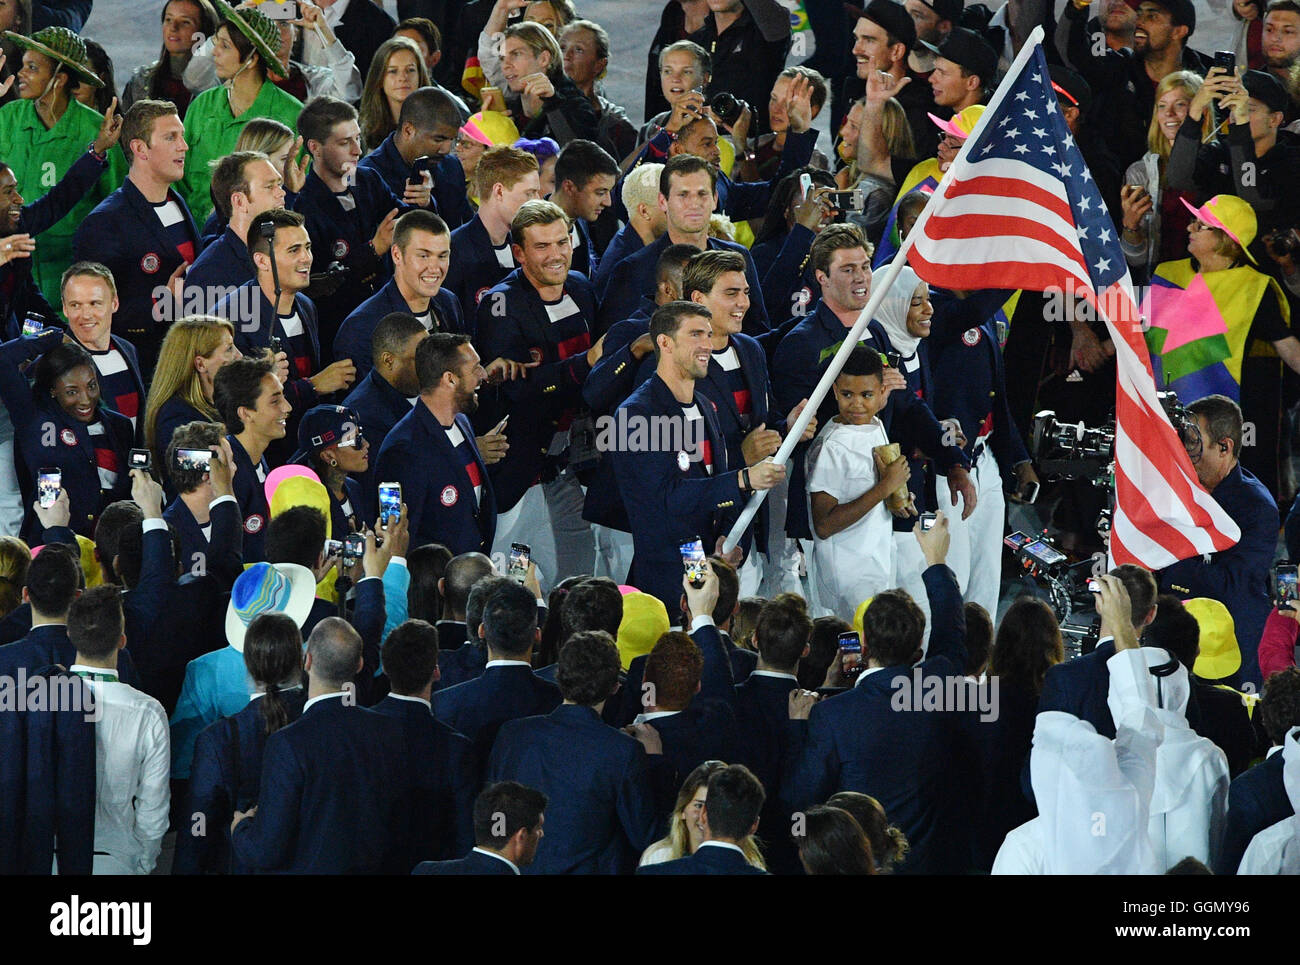 Rio de Janeiro, Brazil. 5th Aug, 2016. Flag bearer Michael Phelps from the USA and the U.S. Olympic team arrive during the opening ceremony of the Rio 2016 Olympic Games at the Maracana stadium in Rio de Janeiro, Brazil, 5 August 2016. Photo: Lukas Schulze/dpa/Alamy Live News Stock Photo